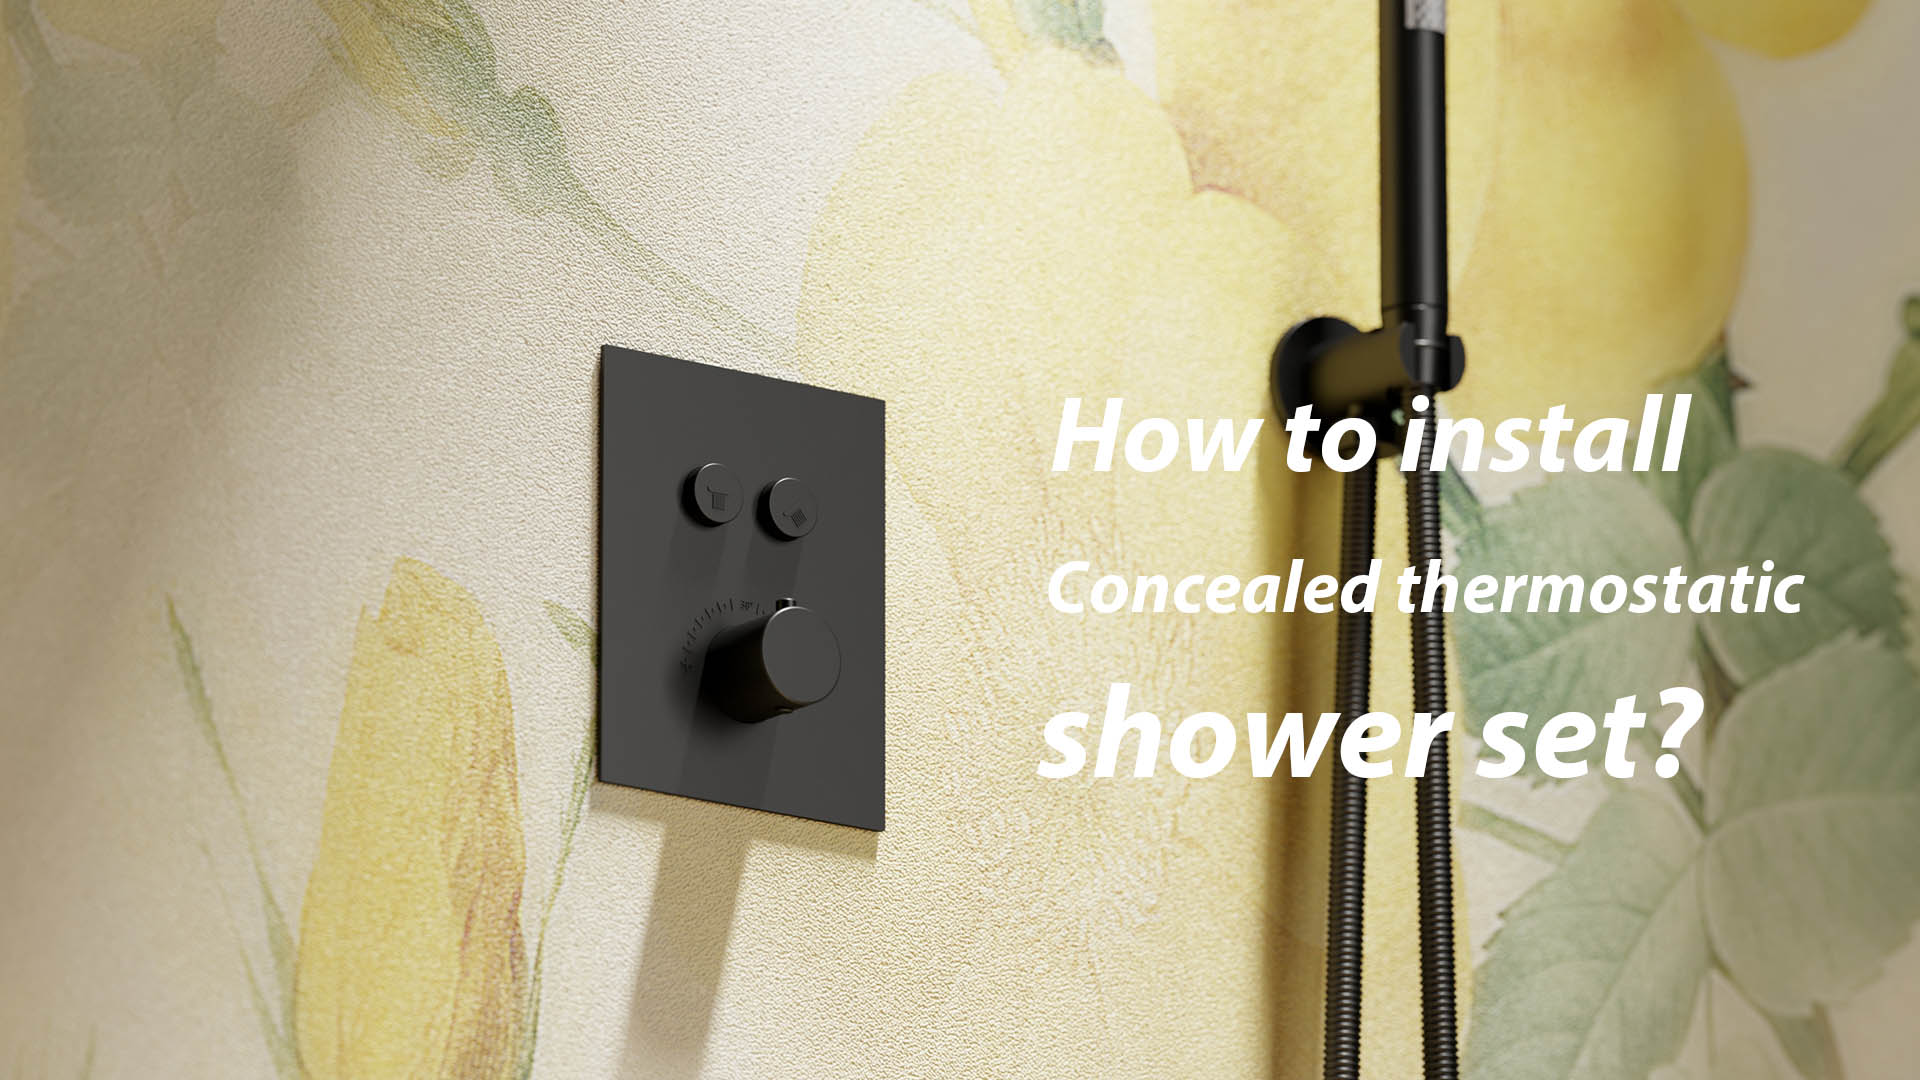 How to install thermostatic concealed shower set - youtube cover.jpg